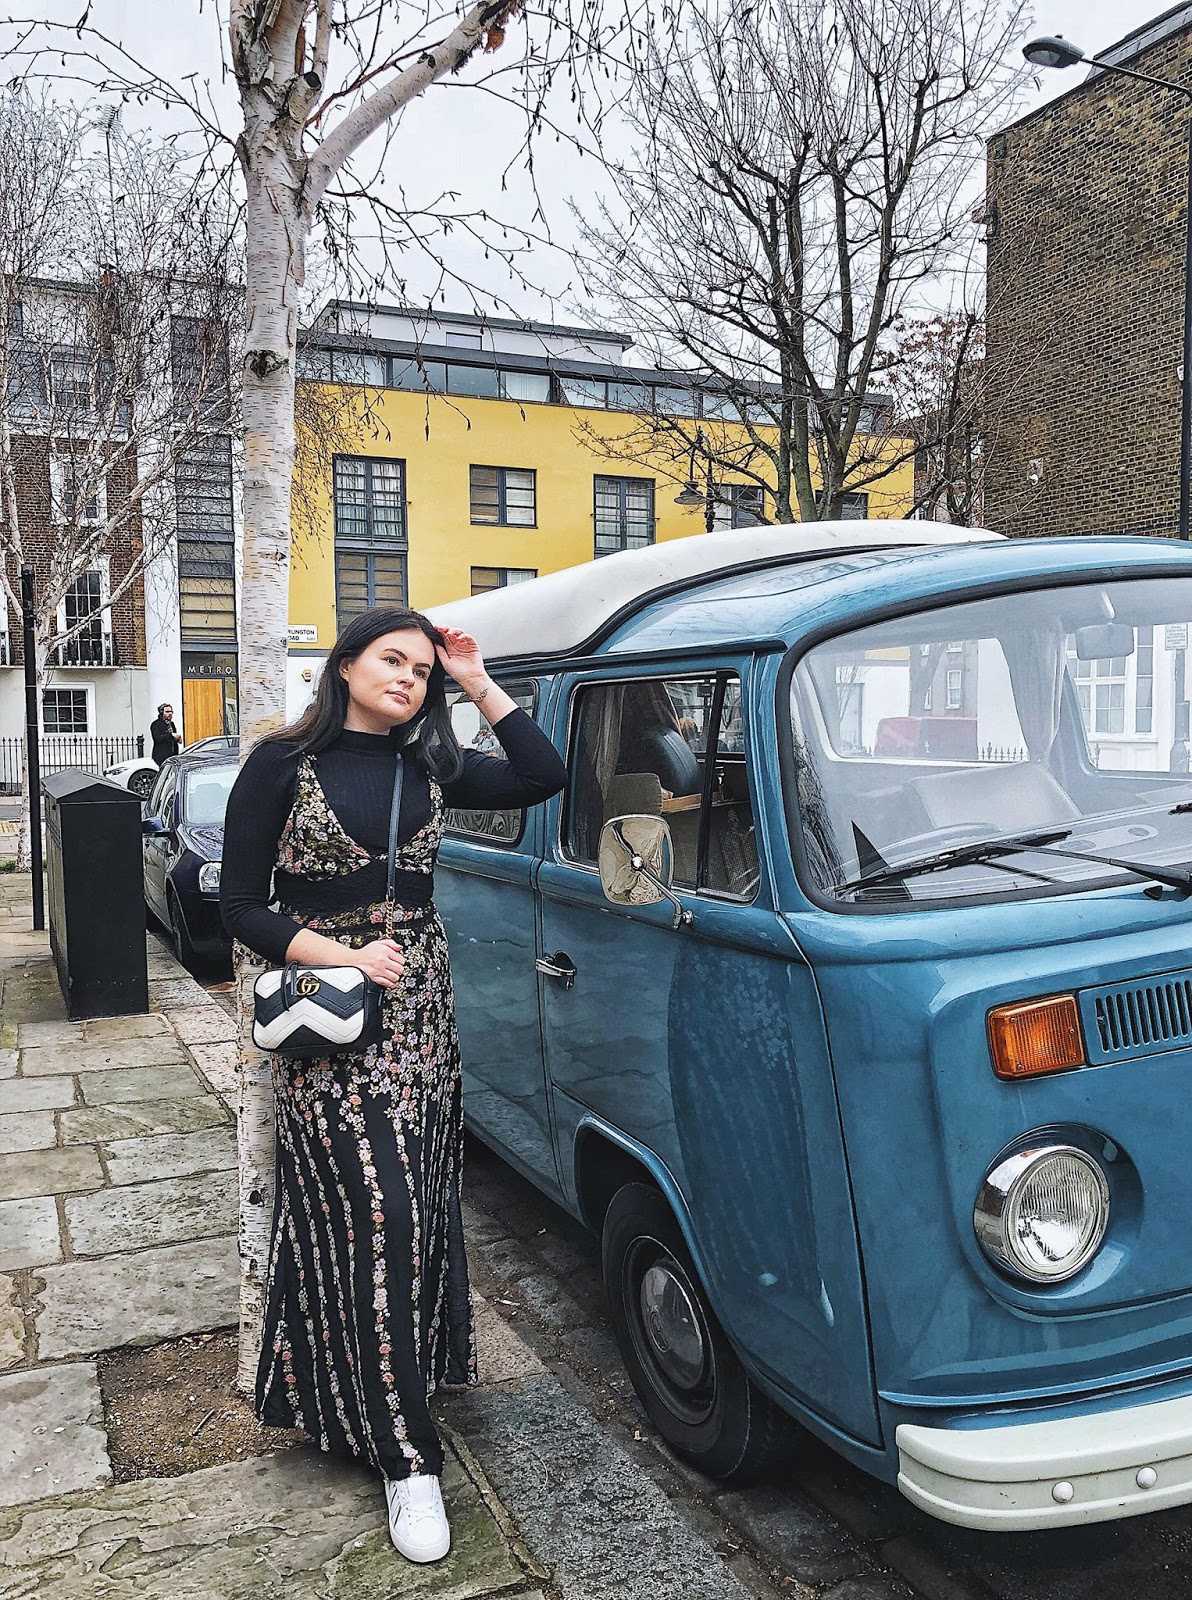 free people uk, free people maxi floral dress, free people asos, blue monday 2019, blue monday, how to tackle blue monday, how to motivate yourself when your depressed, mental health blogger uk